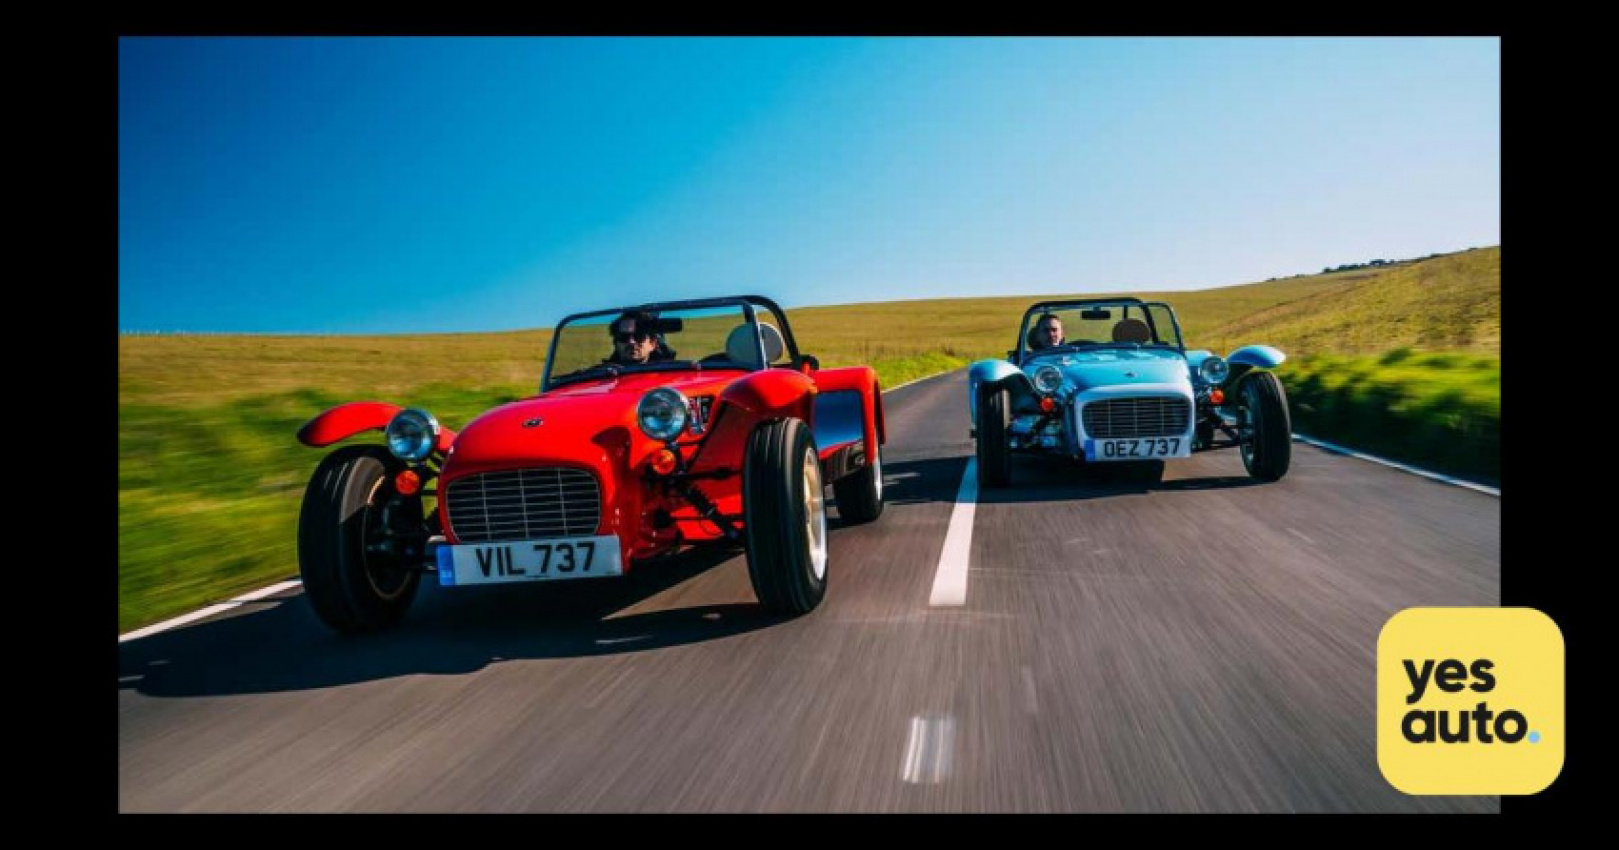 autos, cars, caterham, car news, caterham cars bought by japan-based vt holdings